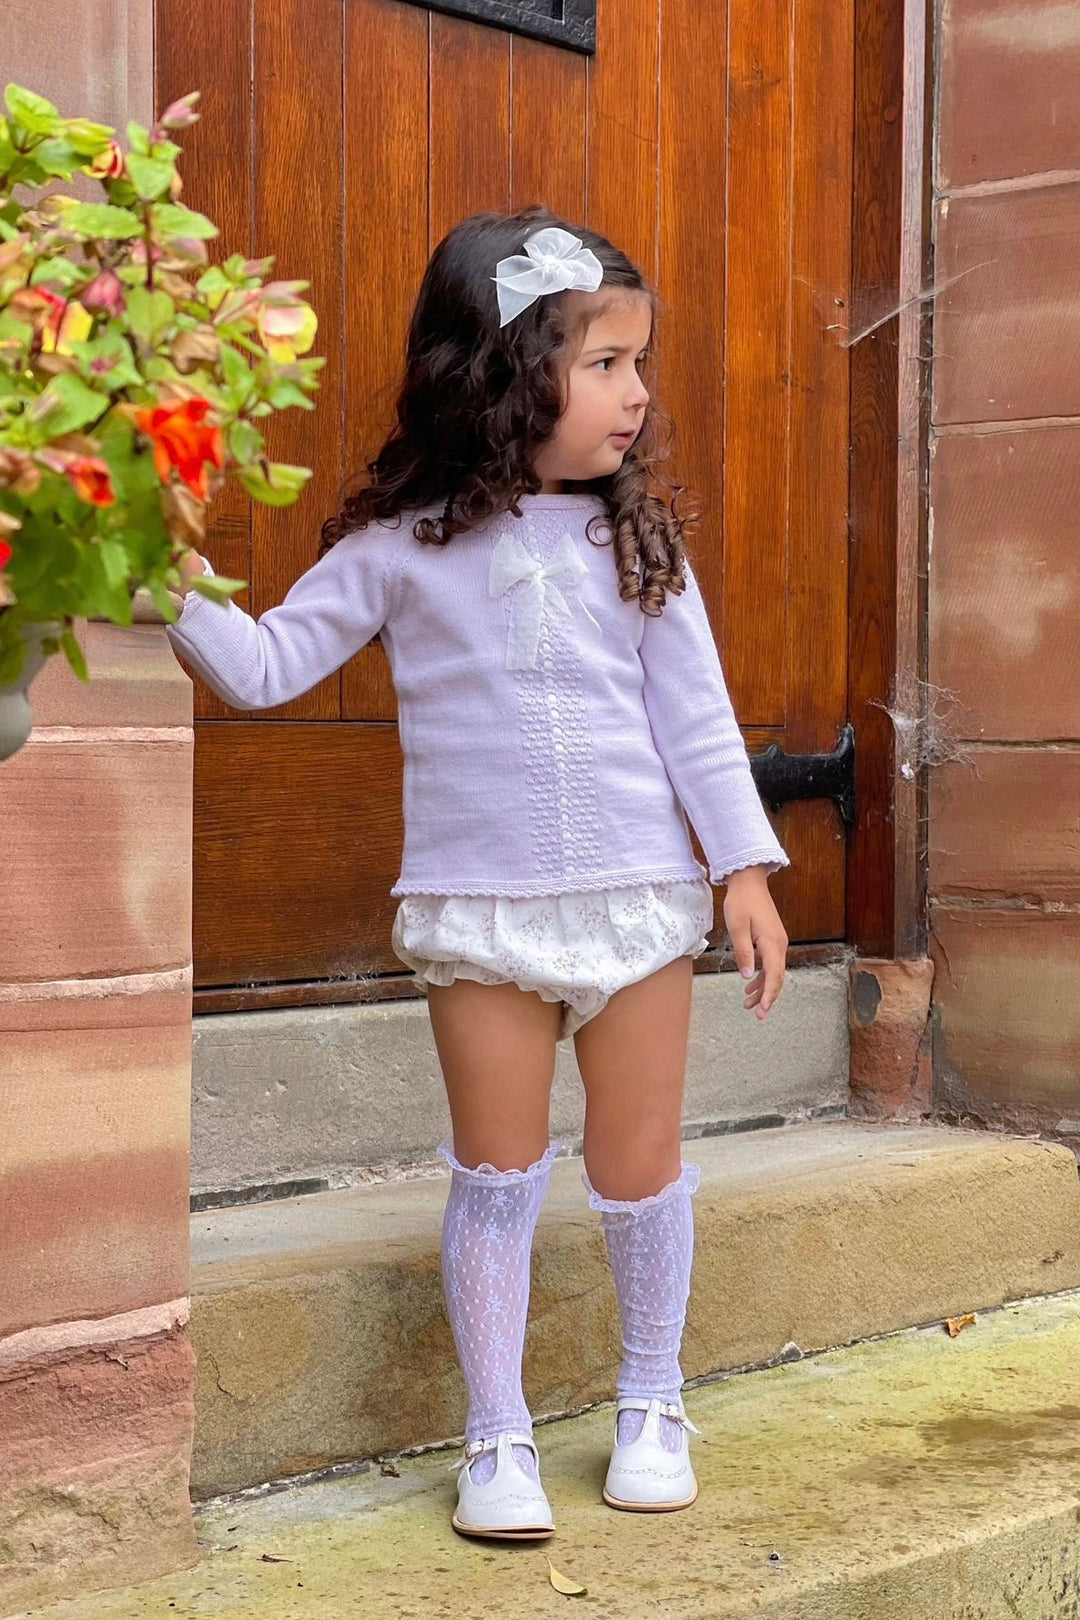 Granlei "Constance" Lilac Knit Top & Floral Bloomers | Millie and John